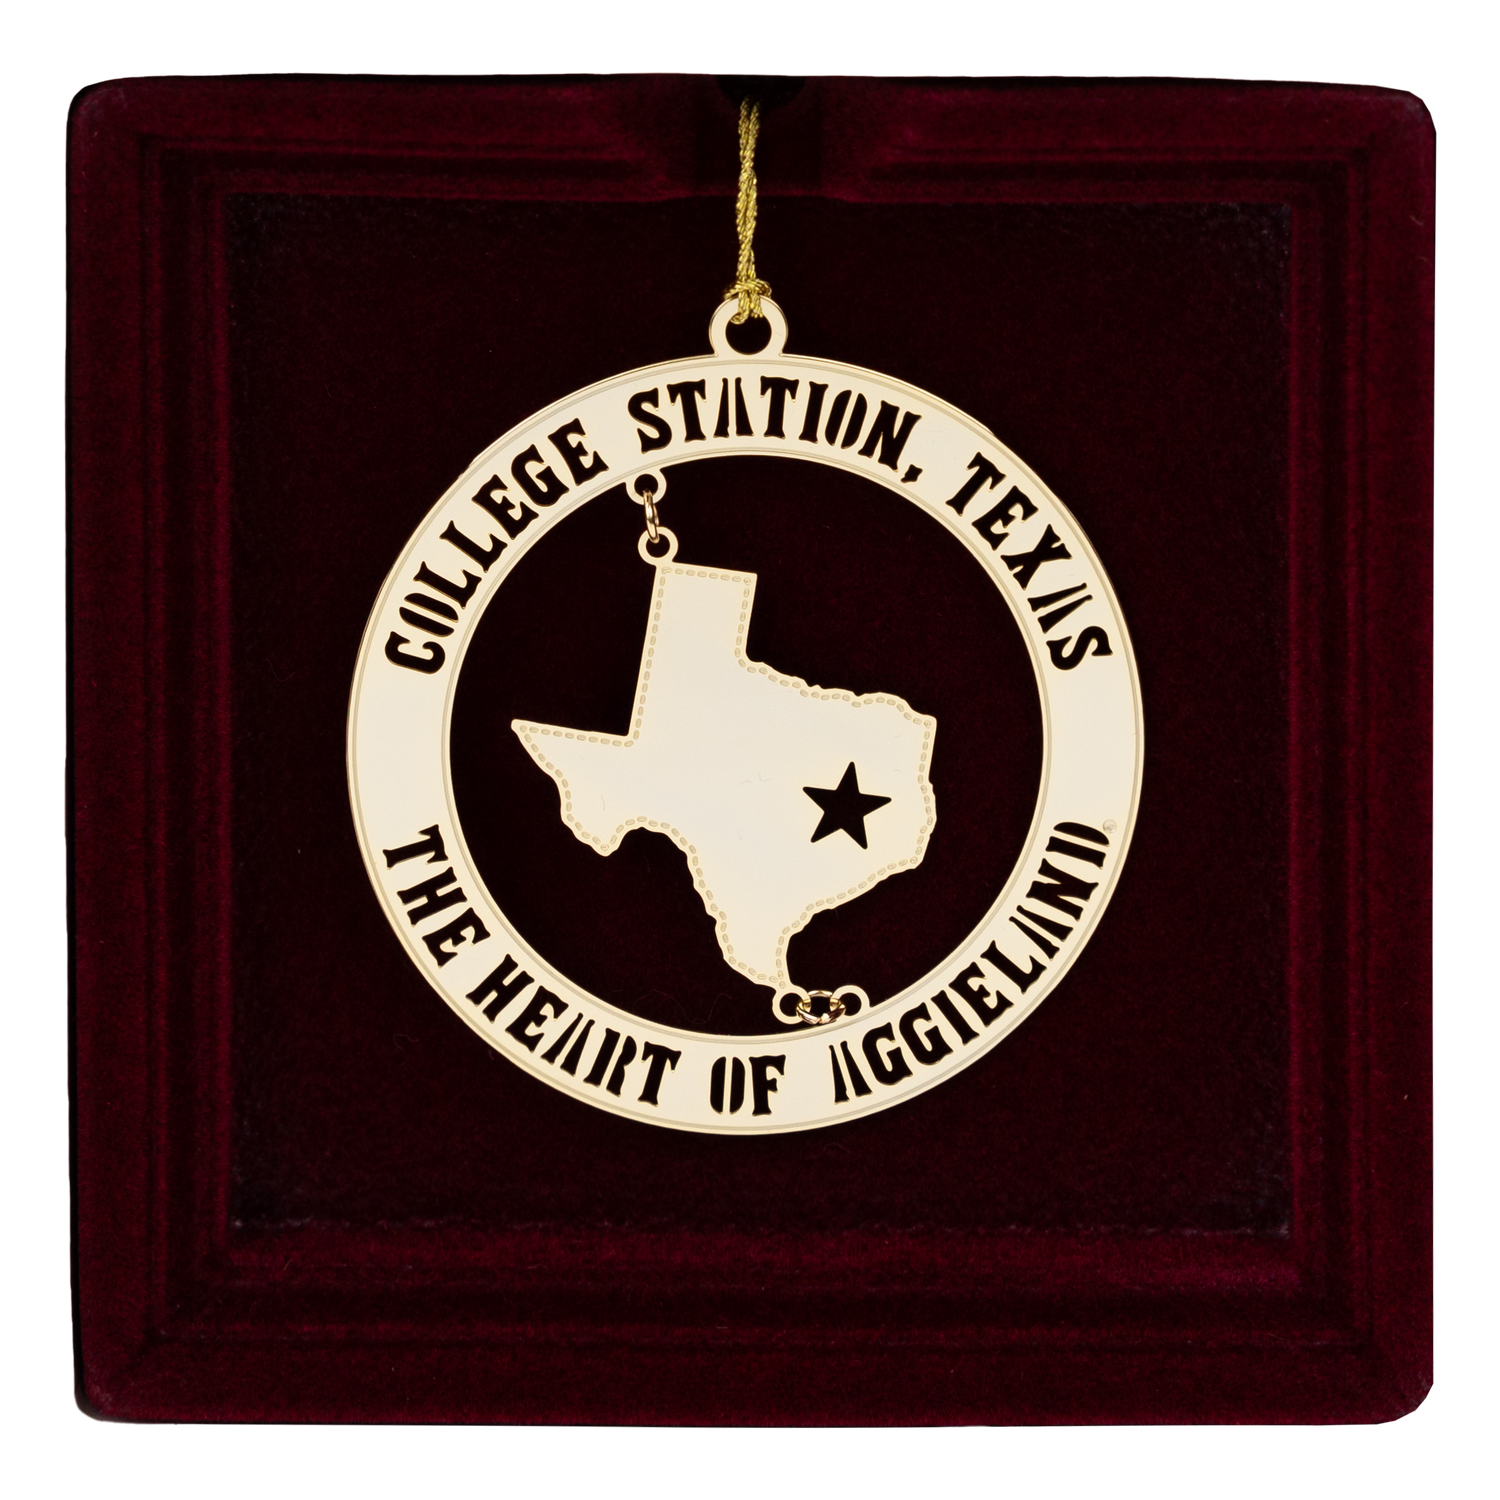 The Heart of Aggieland Ornament